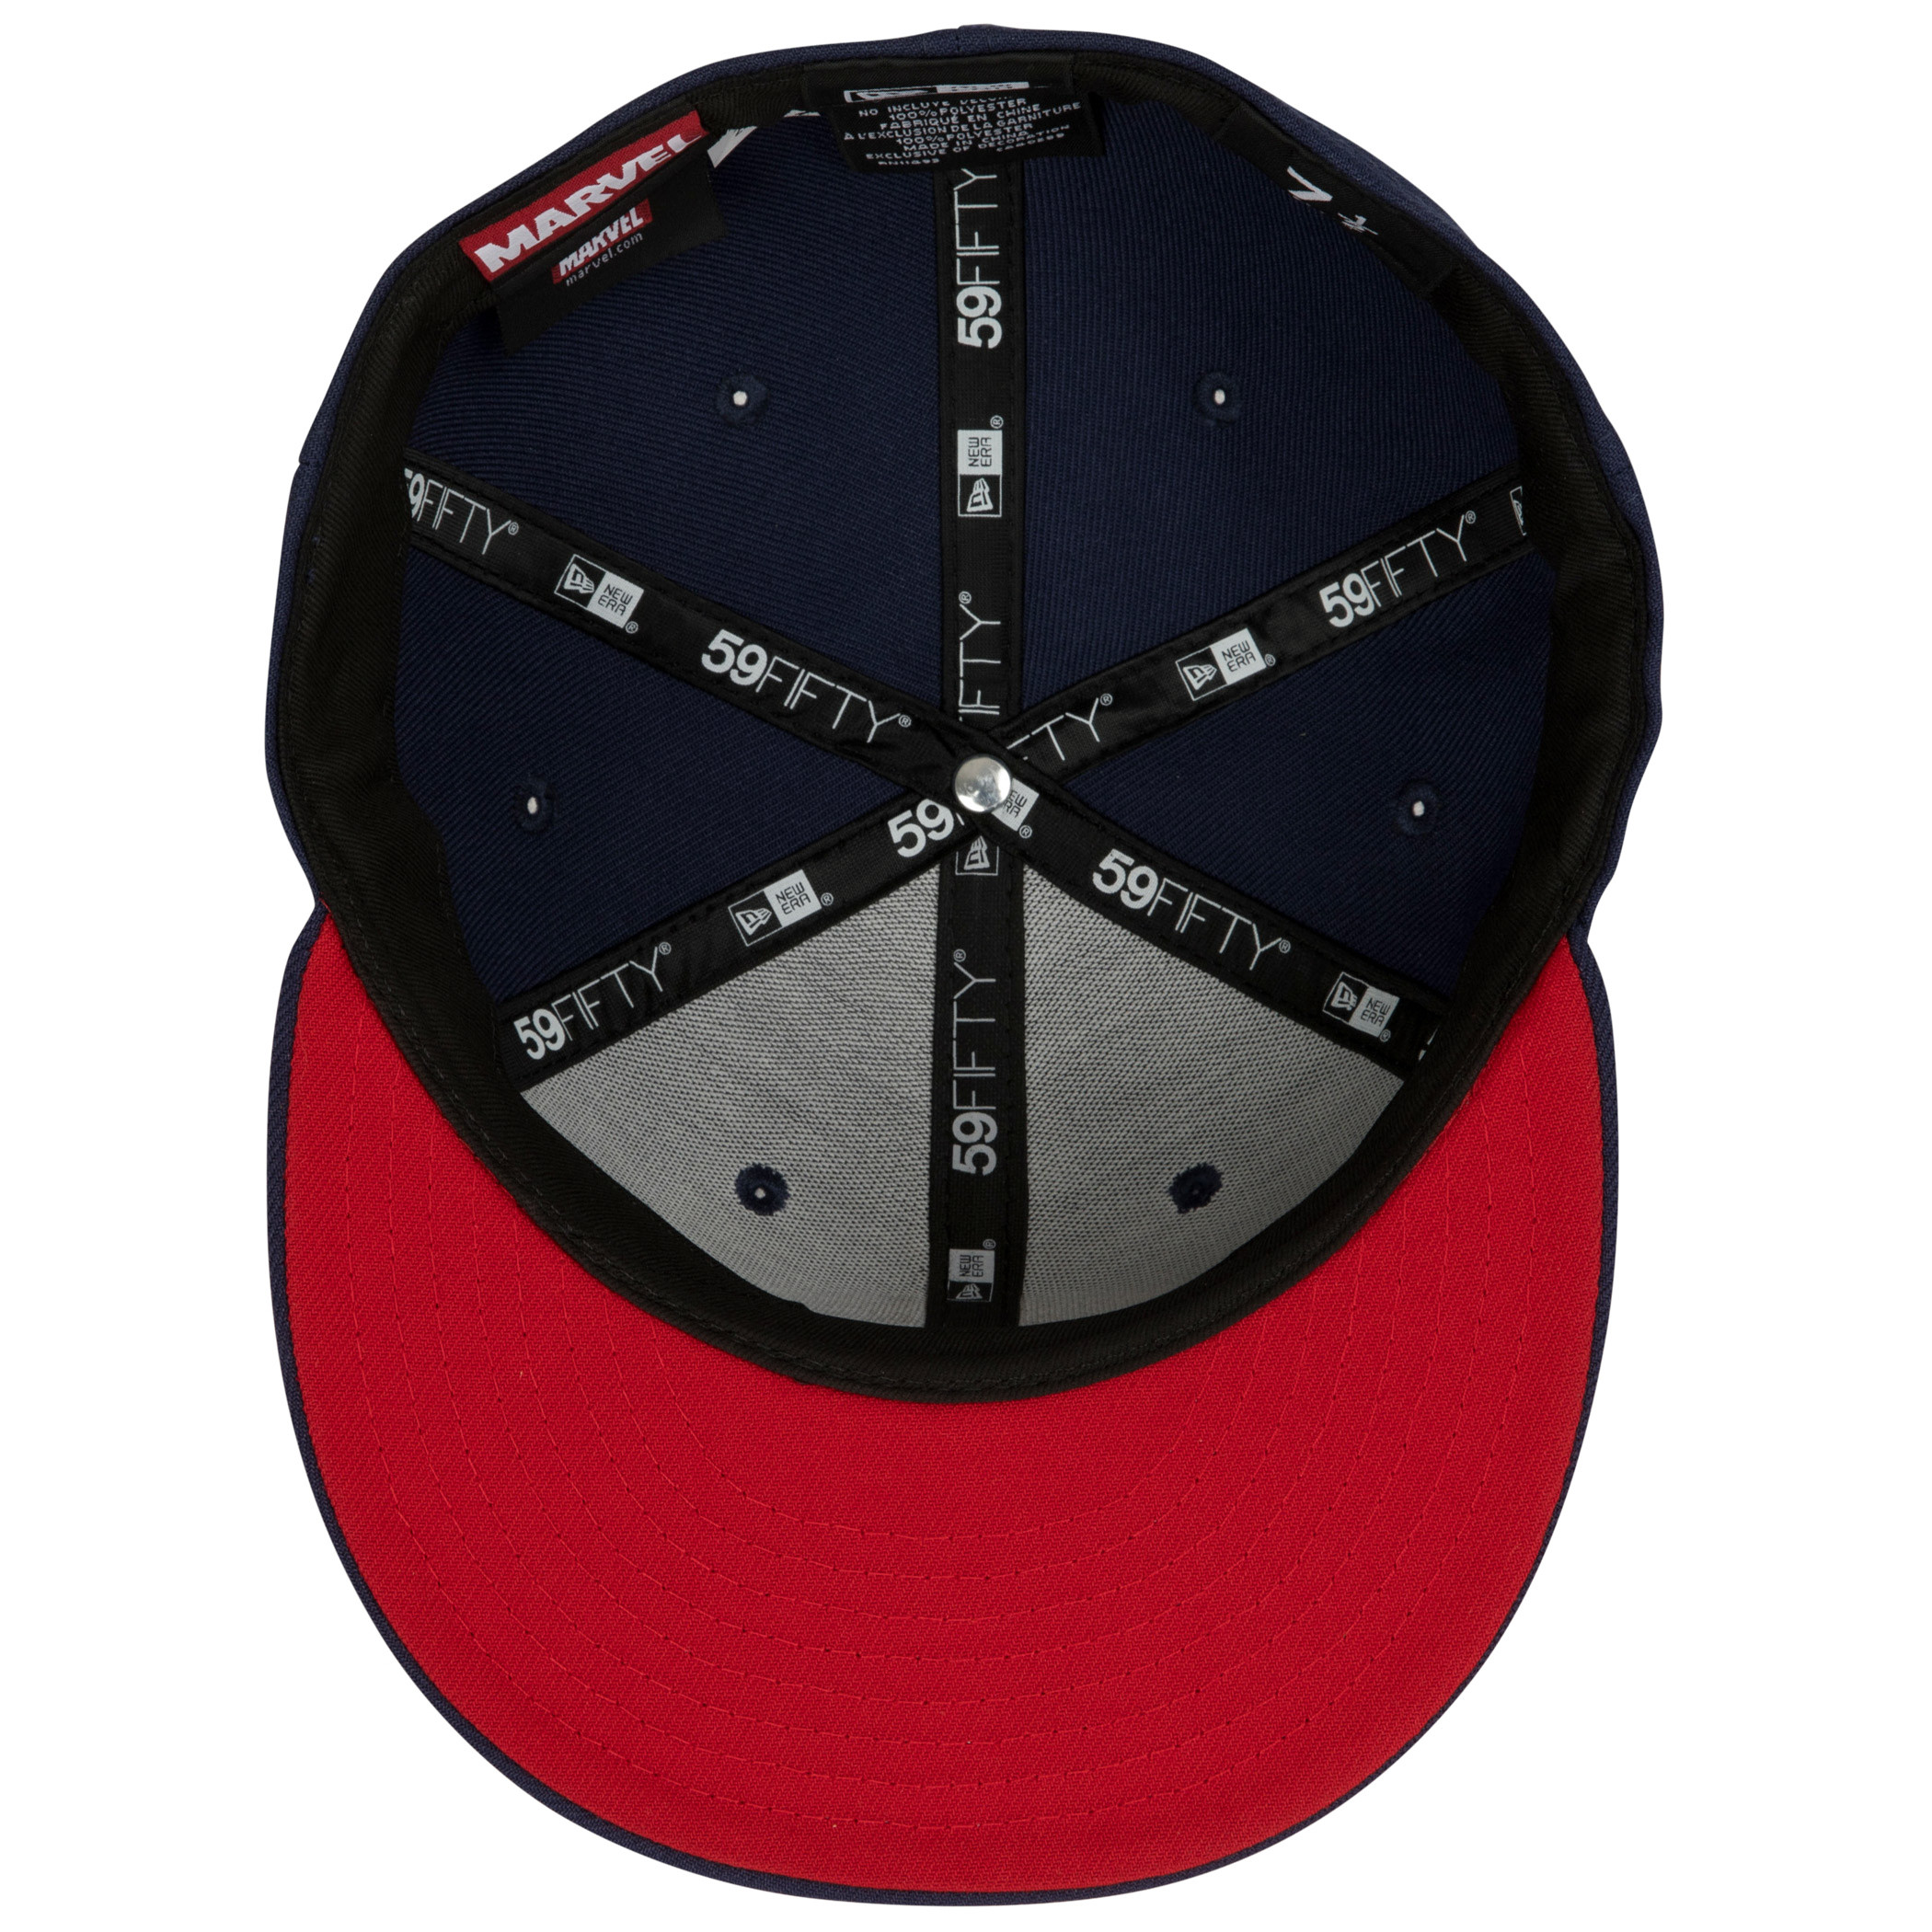 Captain America American Flag Navy Colorway New Era 59Fifty Fitted Hat